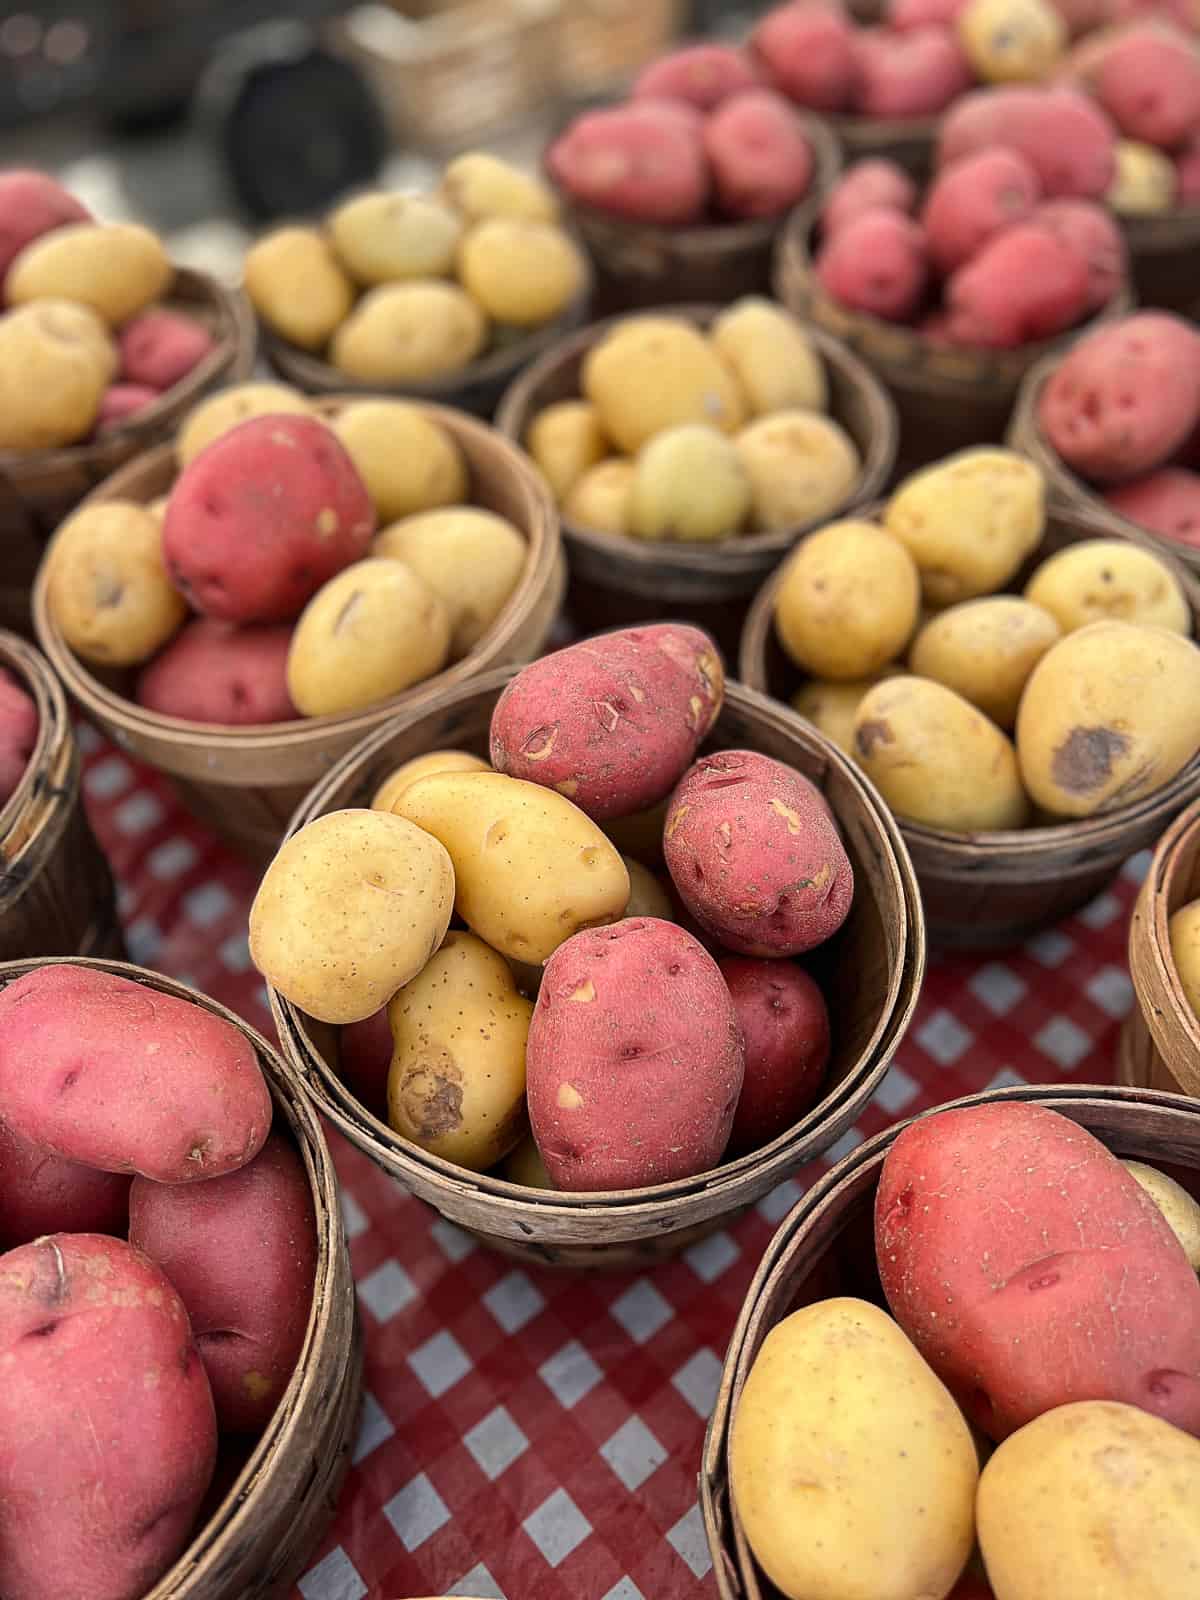 Downtown McKinney Texas Farmers Market Produce Stand with Potatoes